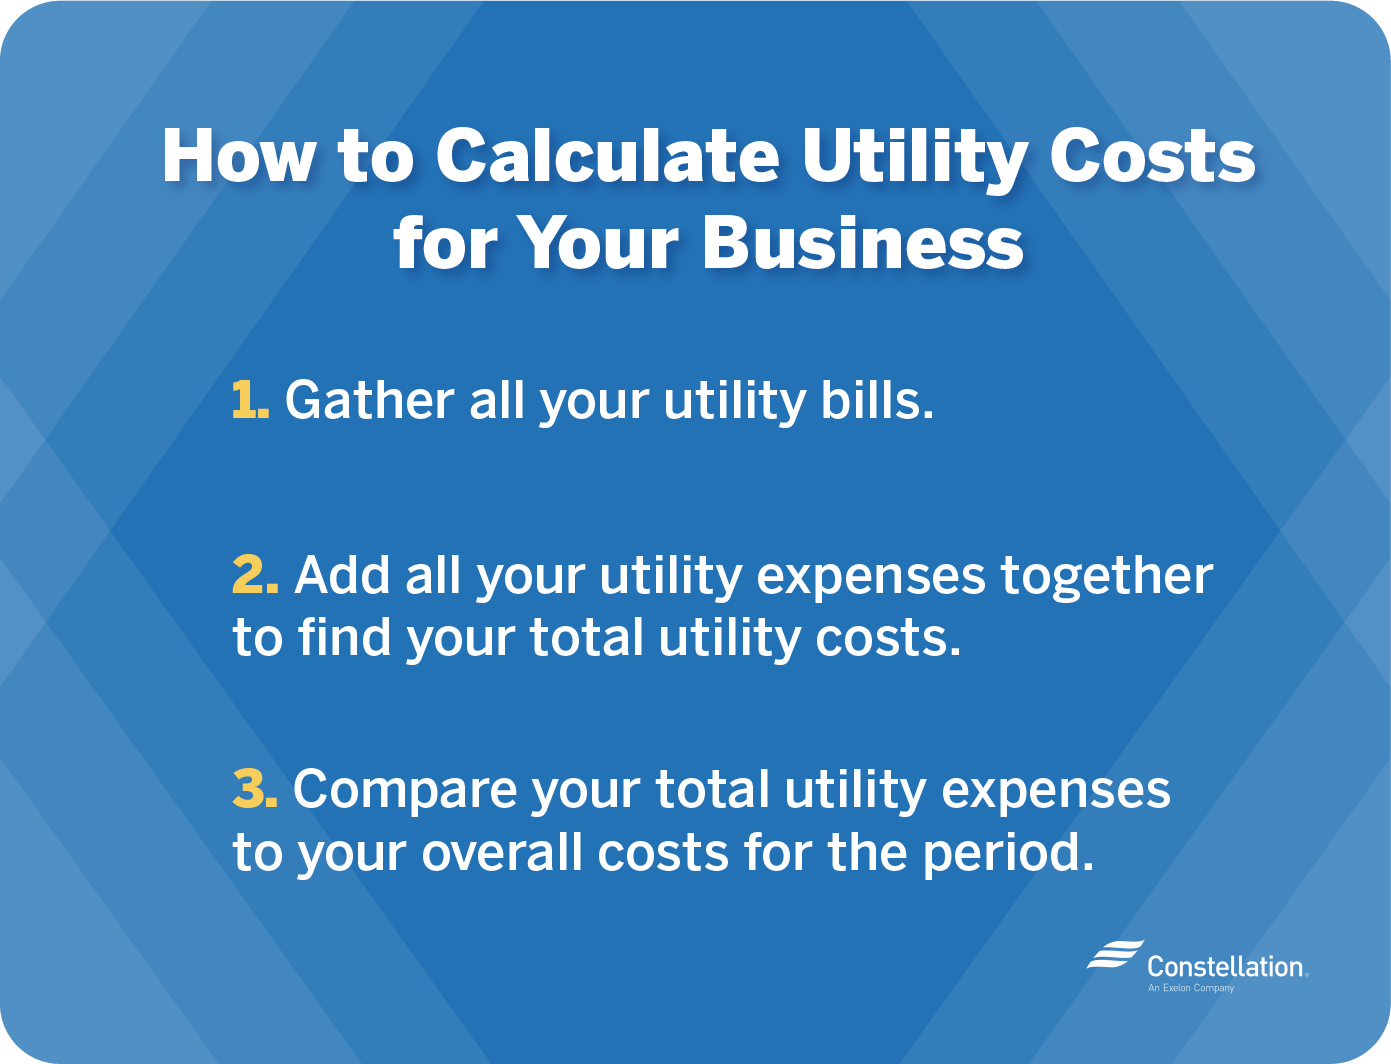 How to calculate the utility costs for your business